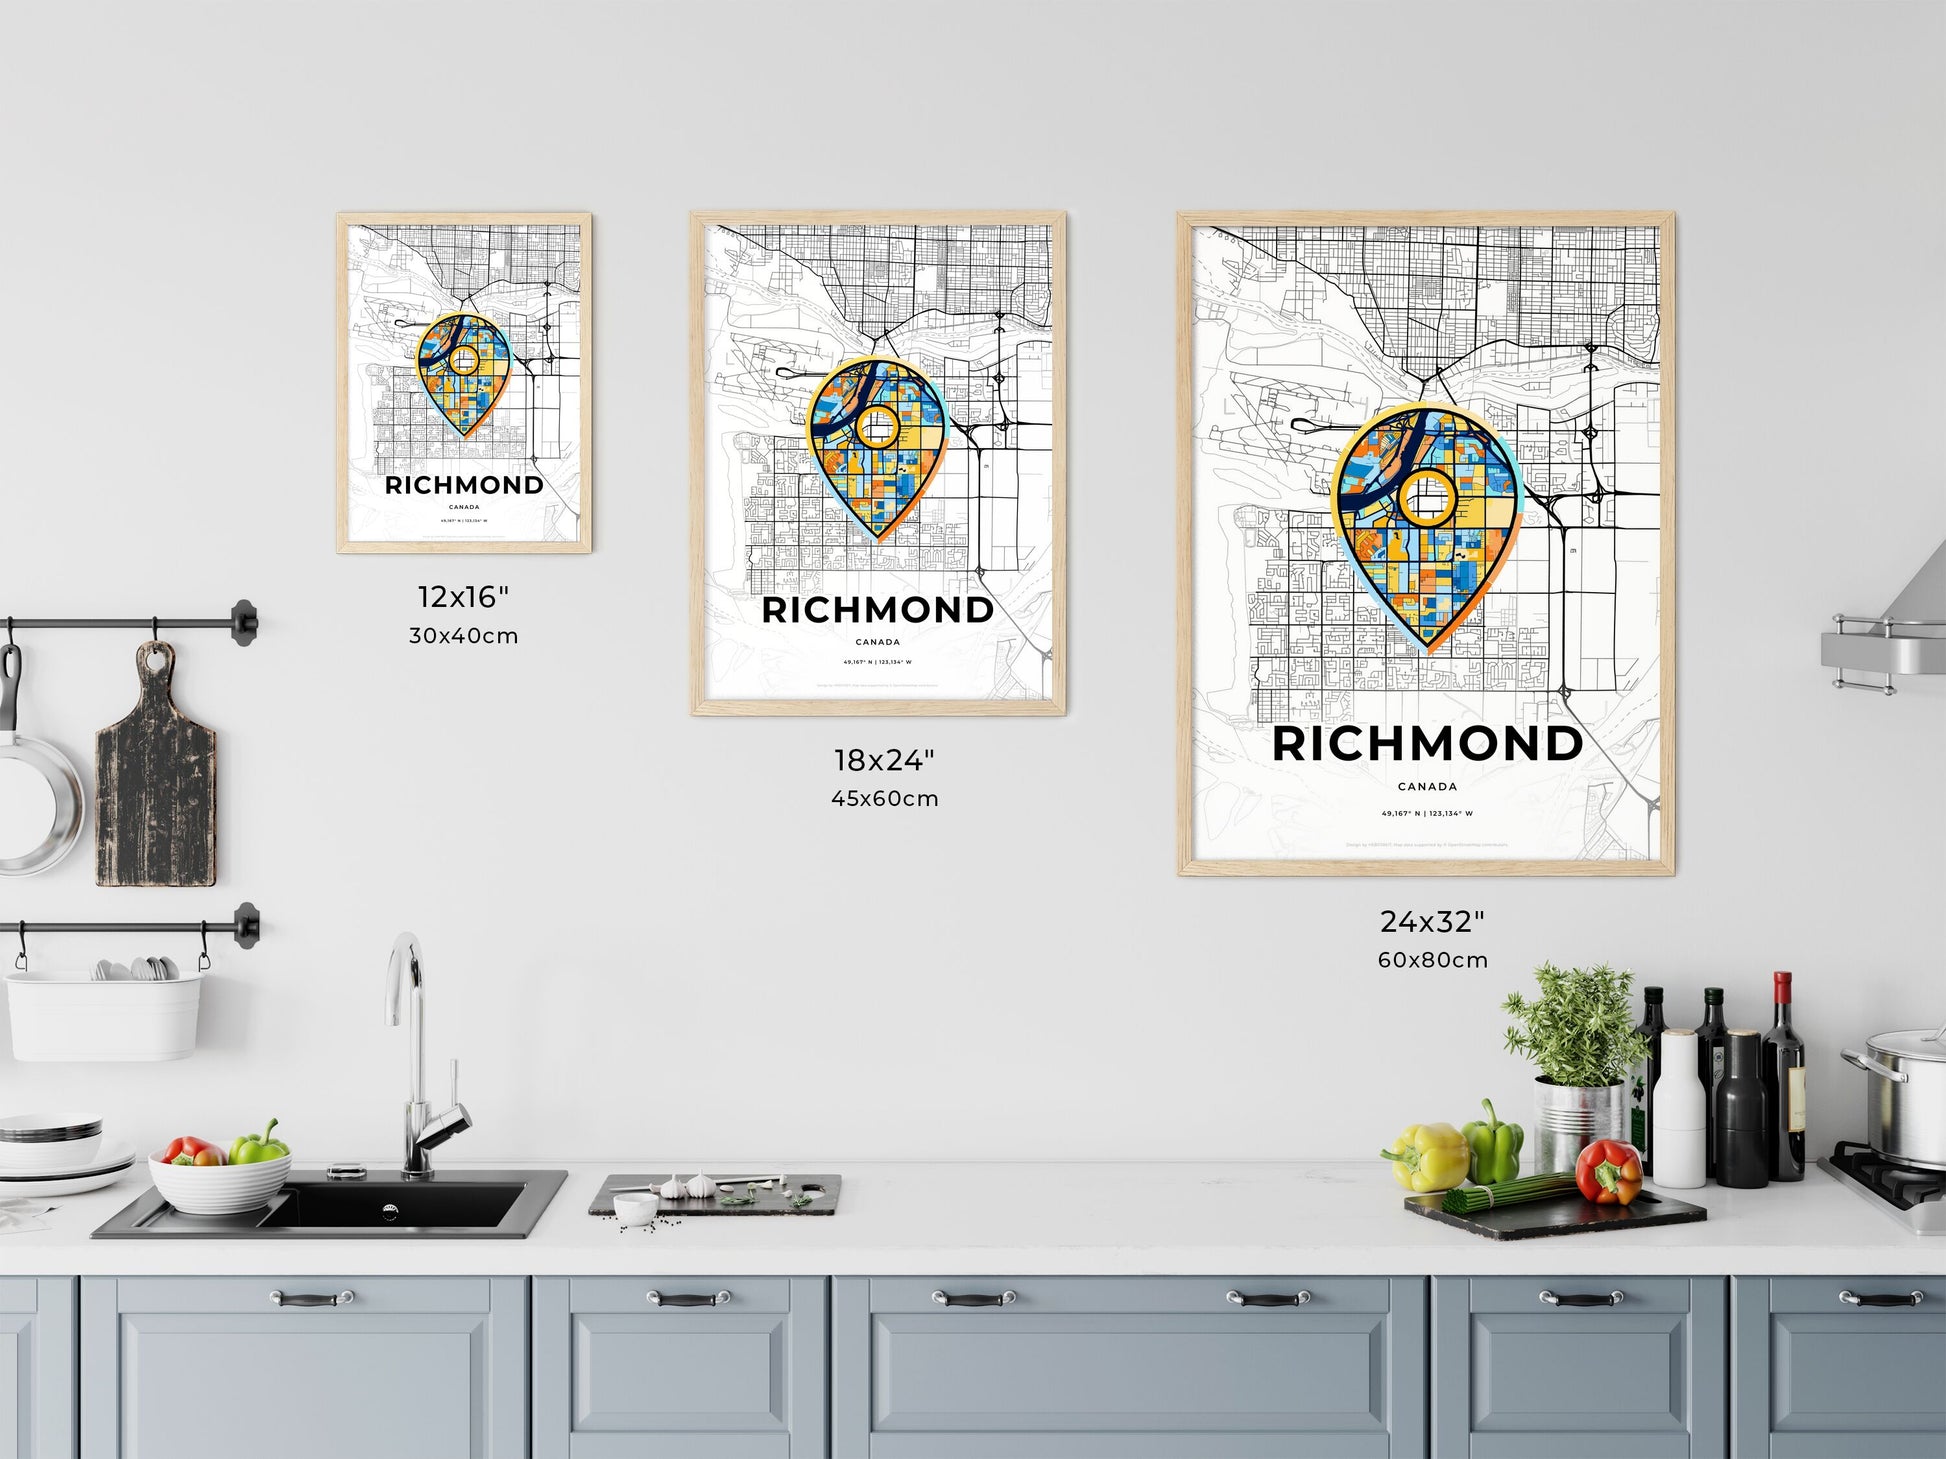 RICHMOND CANADA minimal art map with a colorful icon.